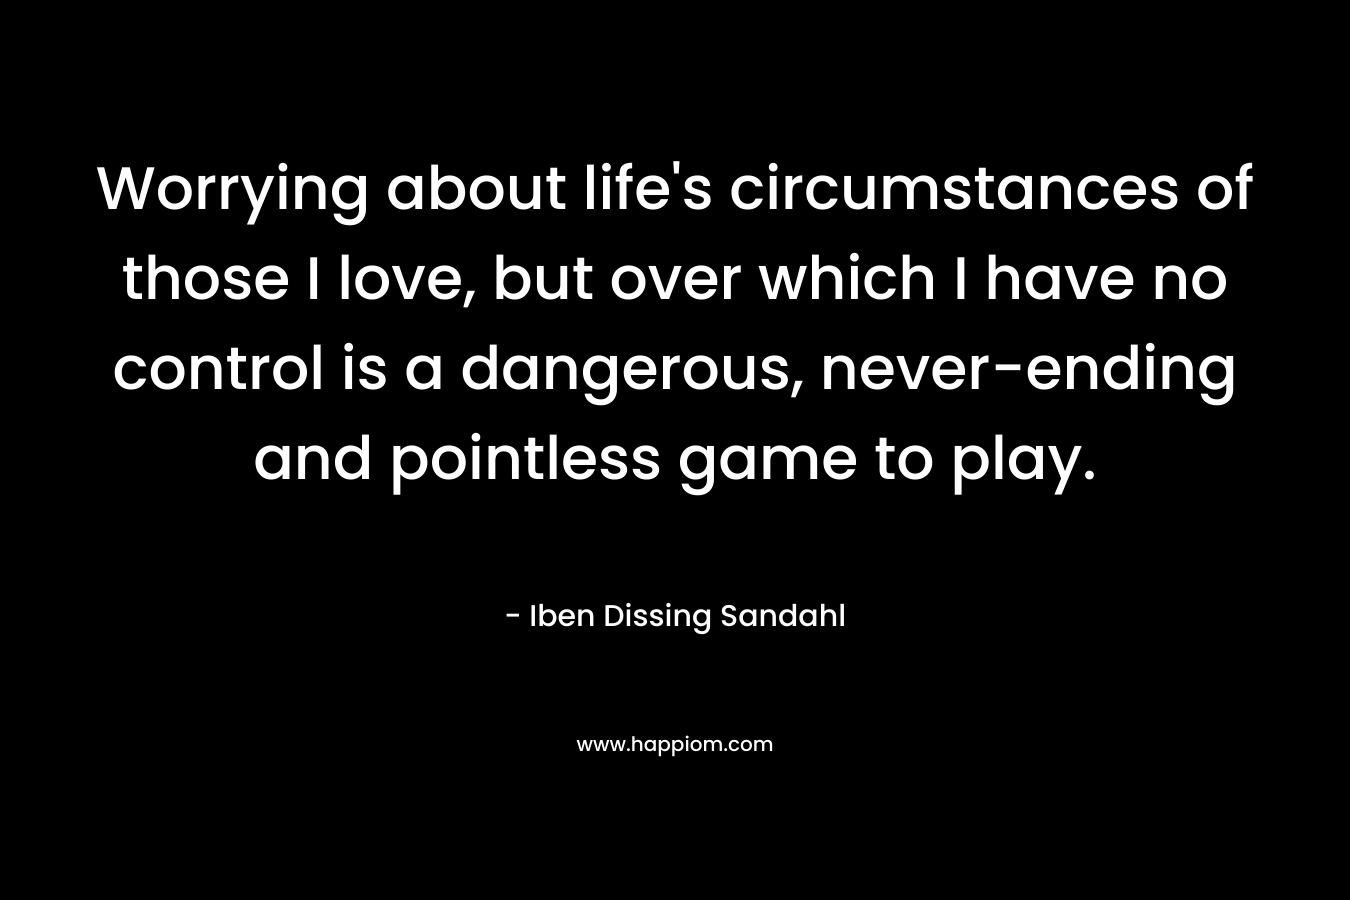 Worrying about life’s circumstances of those I love, but over which I have no control is a dangerous, never-ending and pointless game to play. – Iben Dissing Sandahl